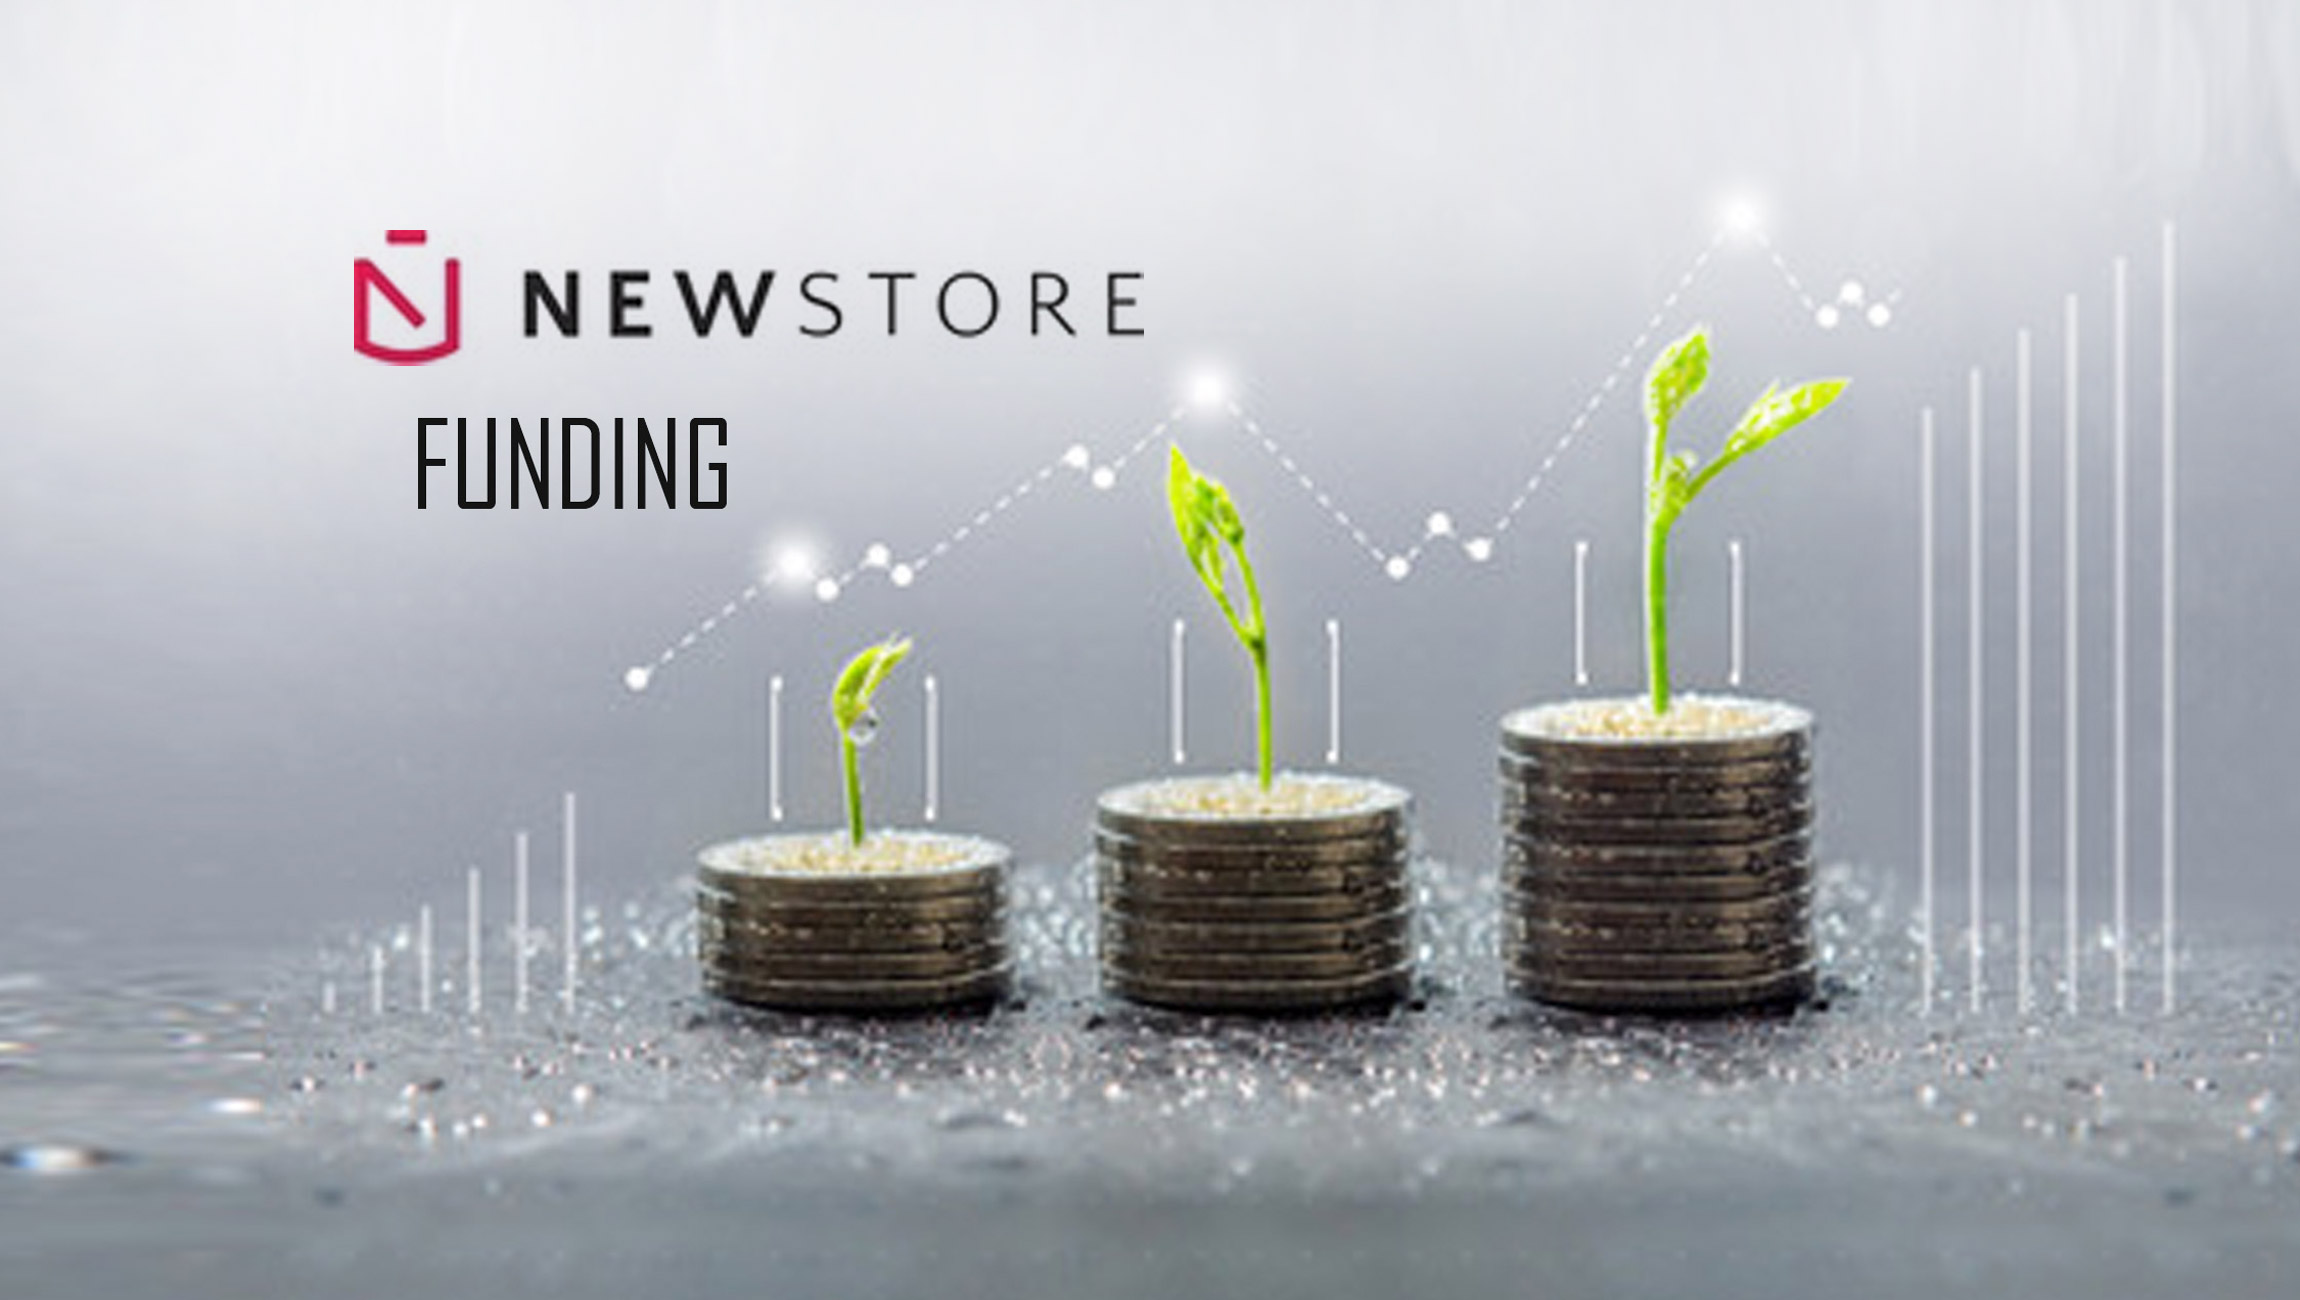 NewStore Raises $45 Million in Series B-1 Financing Round to Accelerate Company Growth